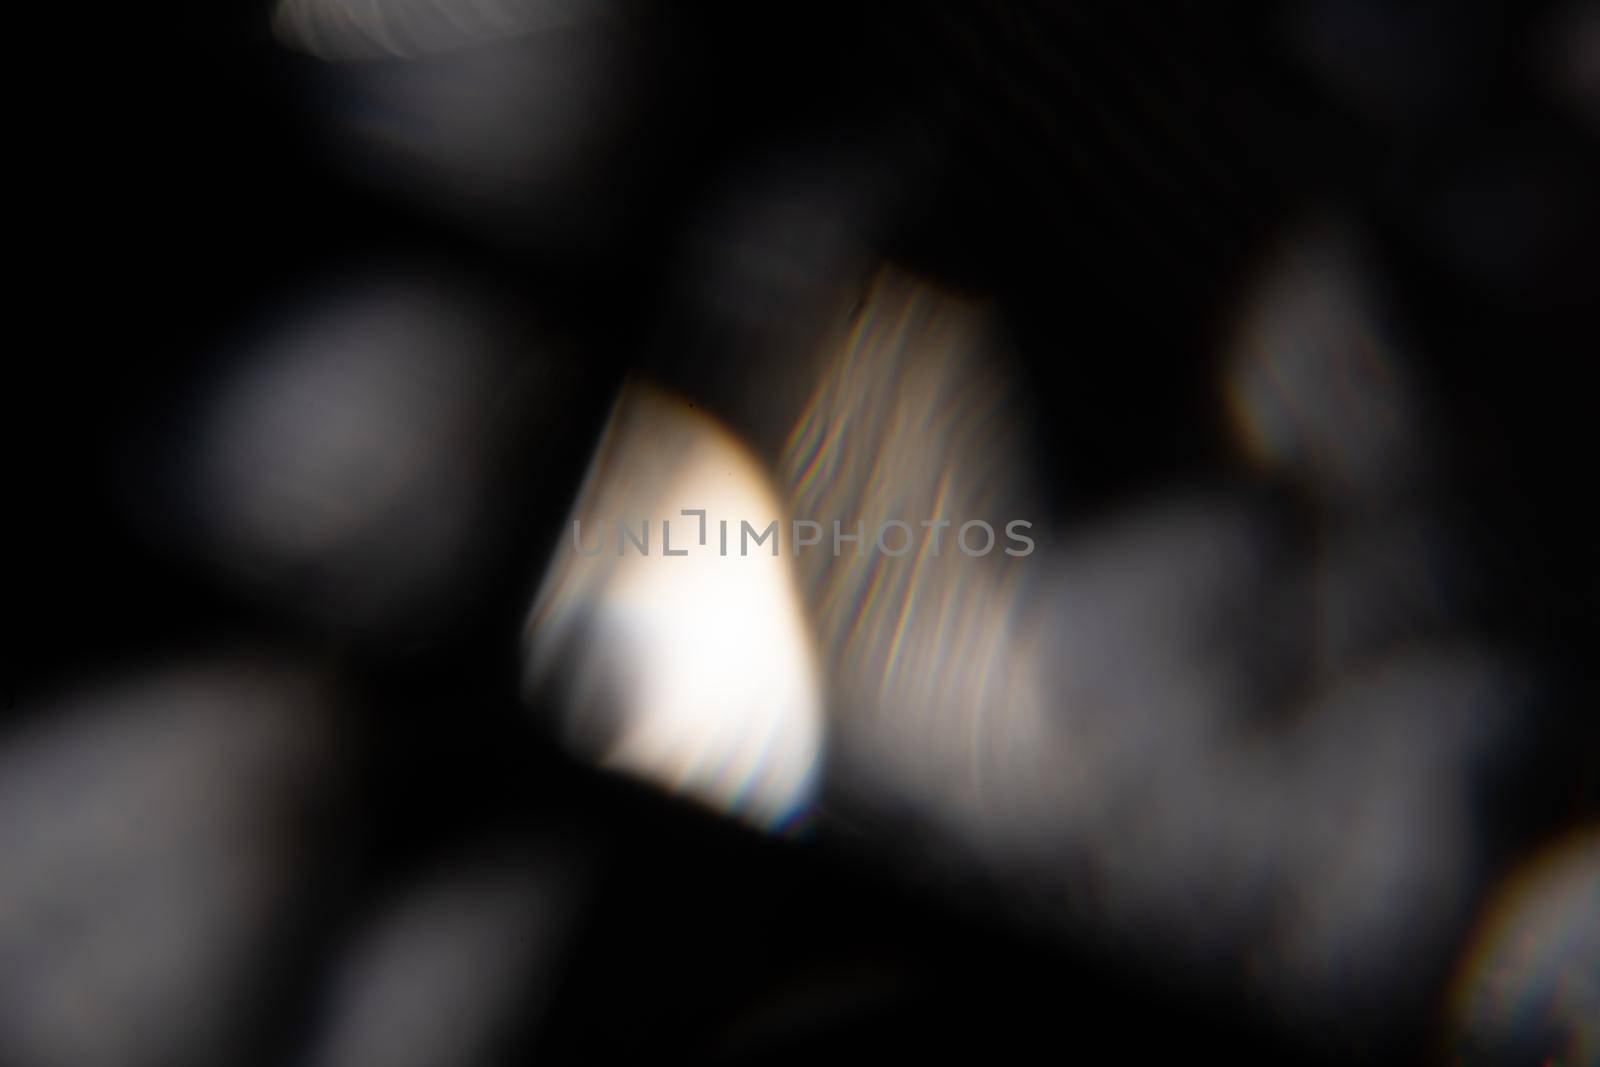 Blue light flare prism rainbow flares overlay effect on black background, light crossing crystals, prismatic sun catcher reflections rays. Abstract blurred colourful lens flare bokeh on dark by photolime